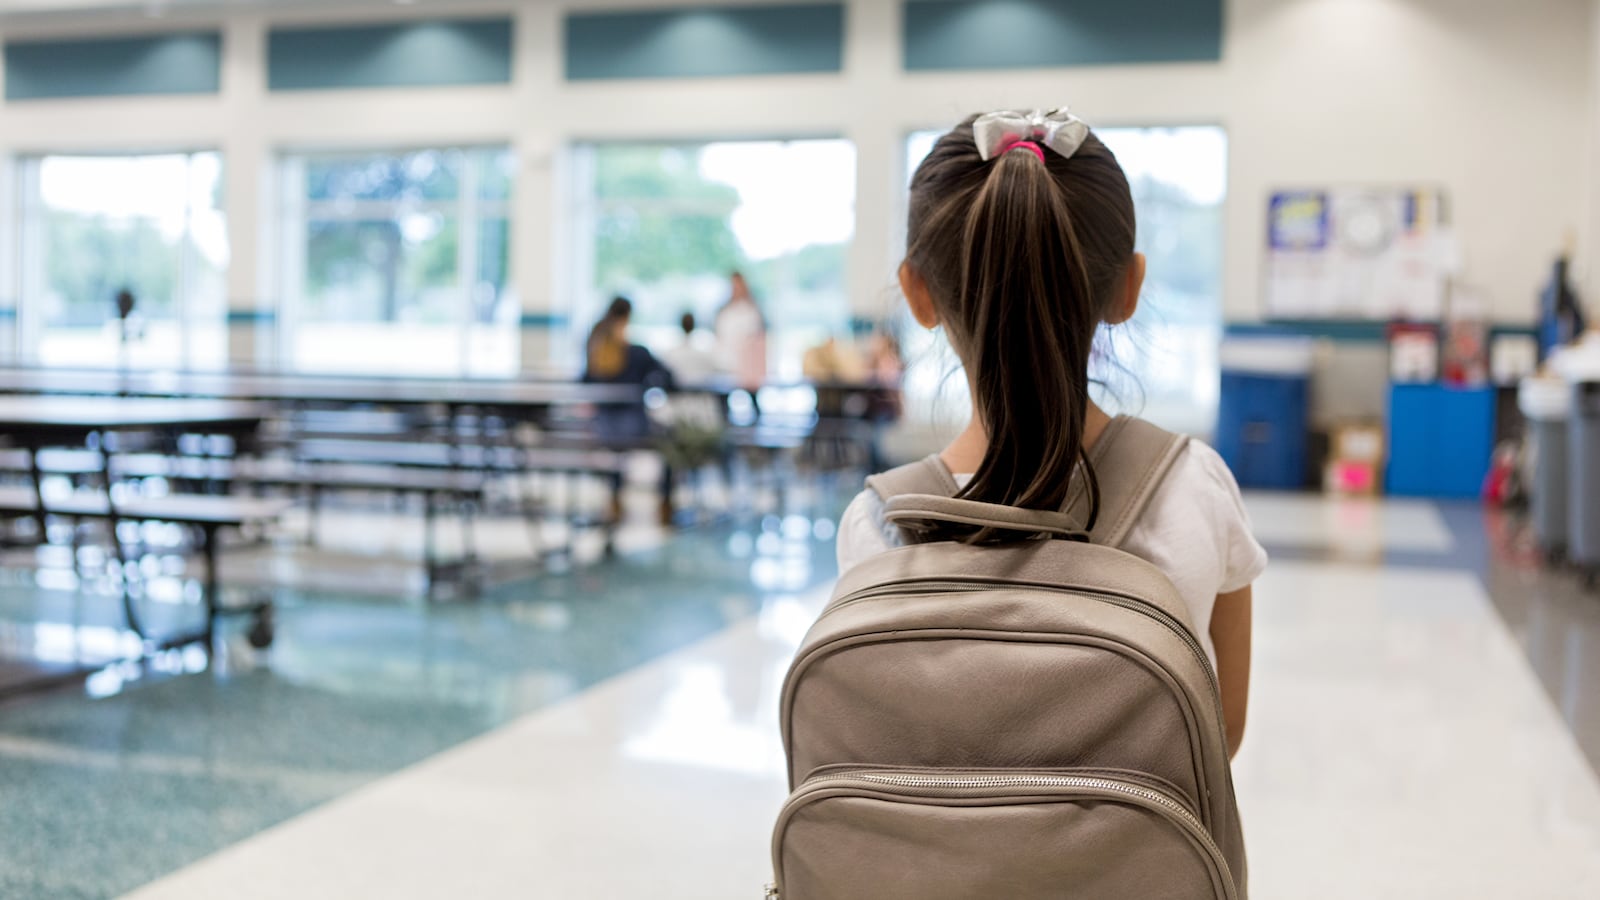 A young schoolgirl with dark hair and a tan backpack pauses as she walks into a school cafeteria.